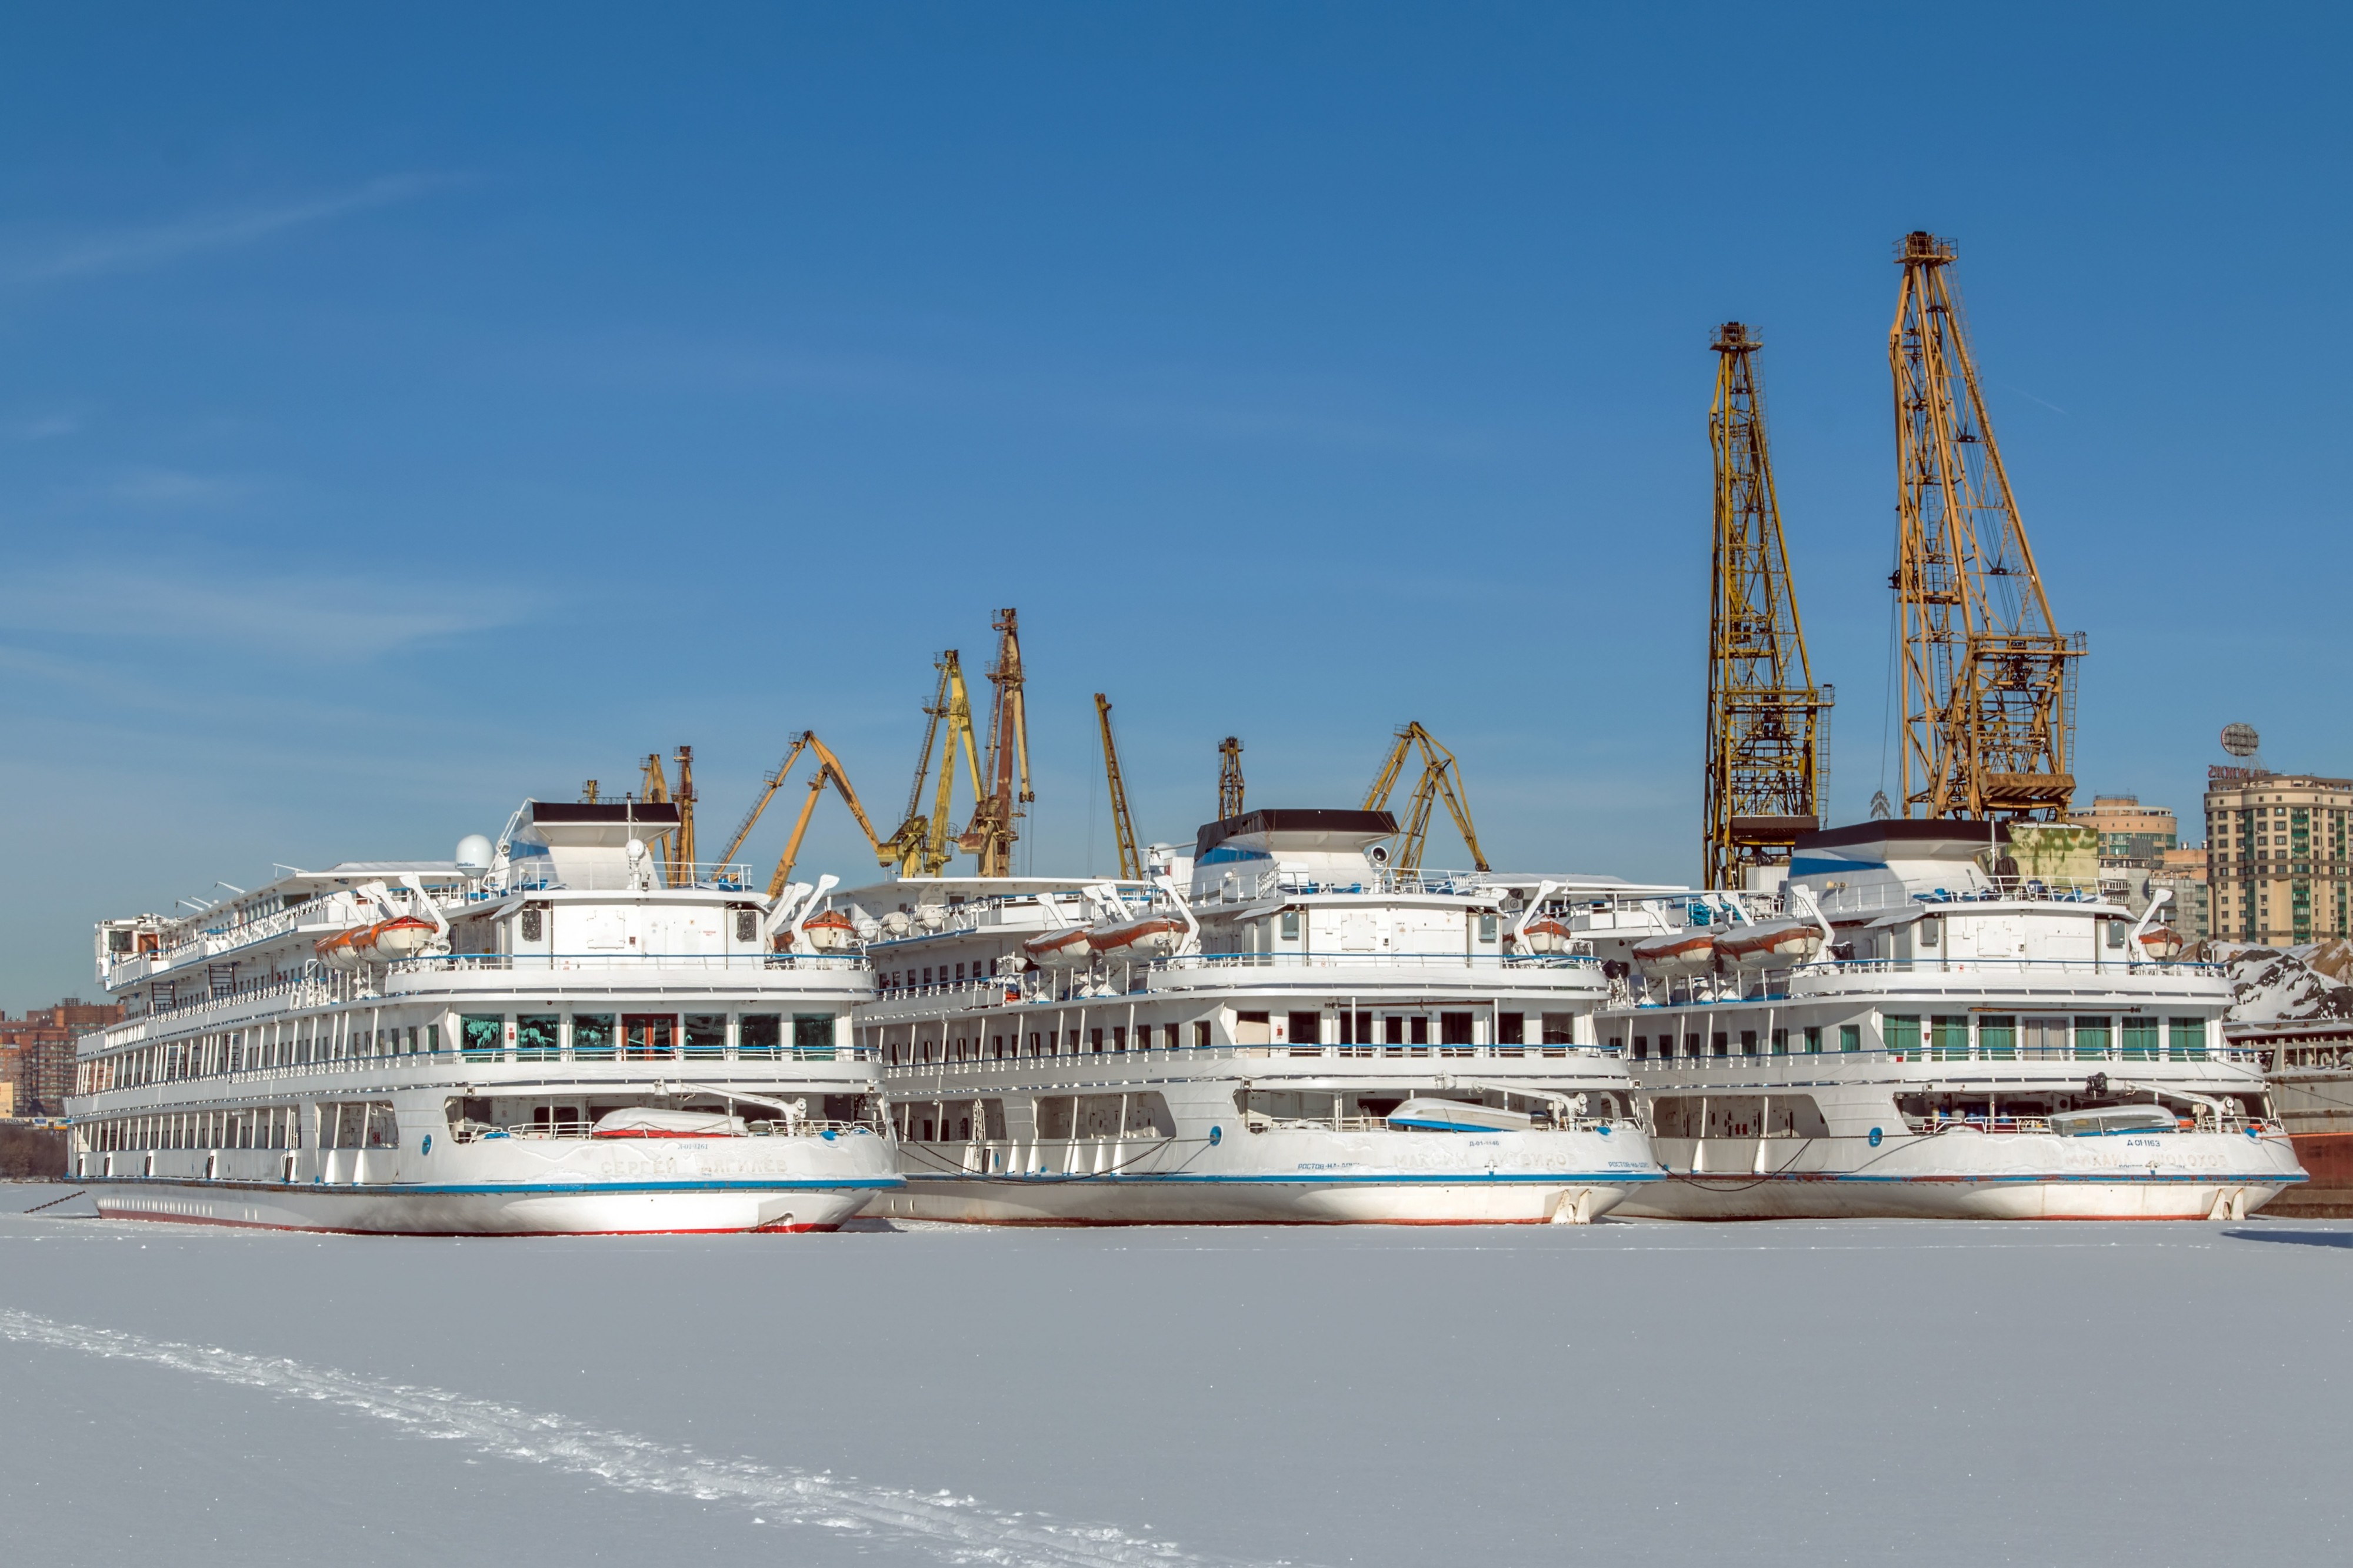 Sergey Dyagilev and Maxim Litvinov and Mikhail Sholokhov in Winter at Moscow North River Port Stern View 10-feb-2015